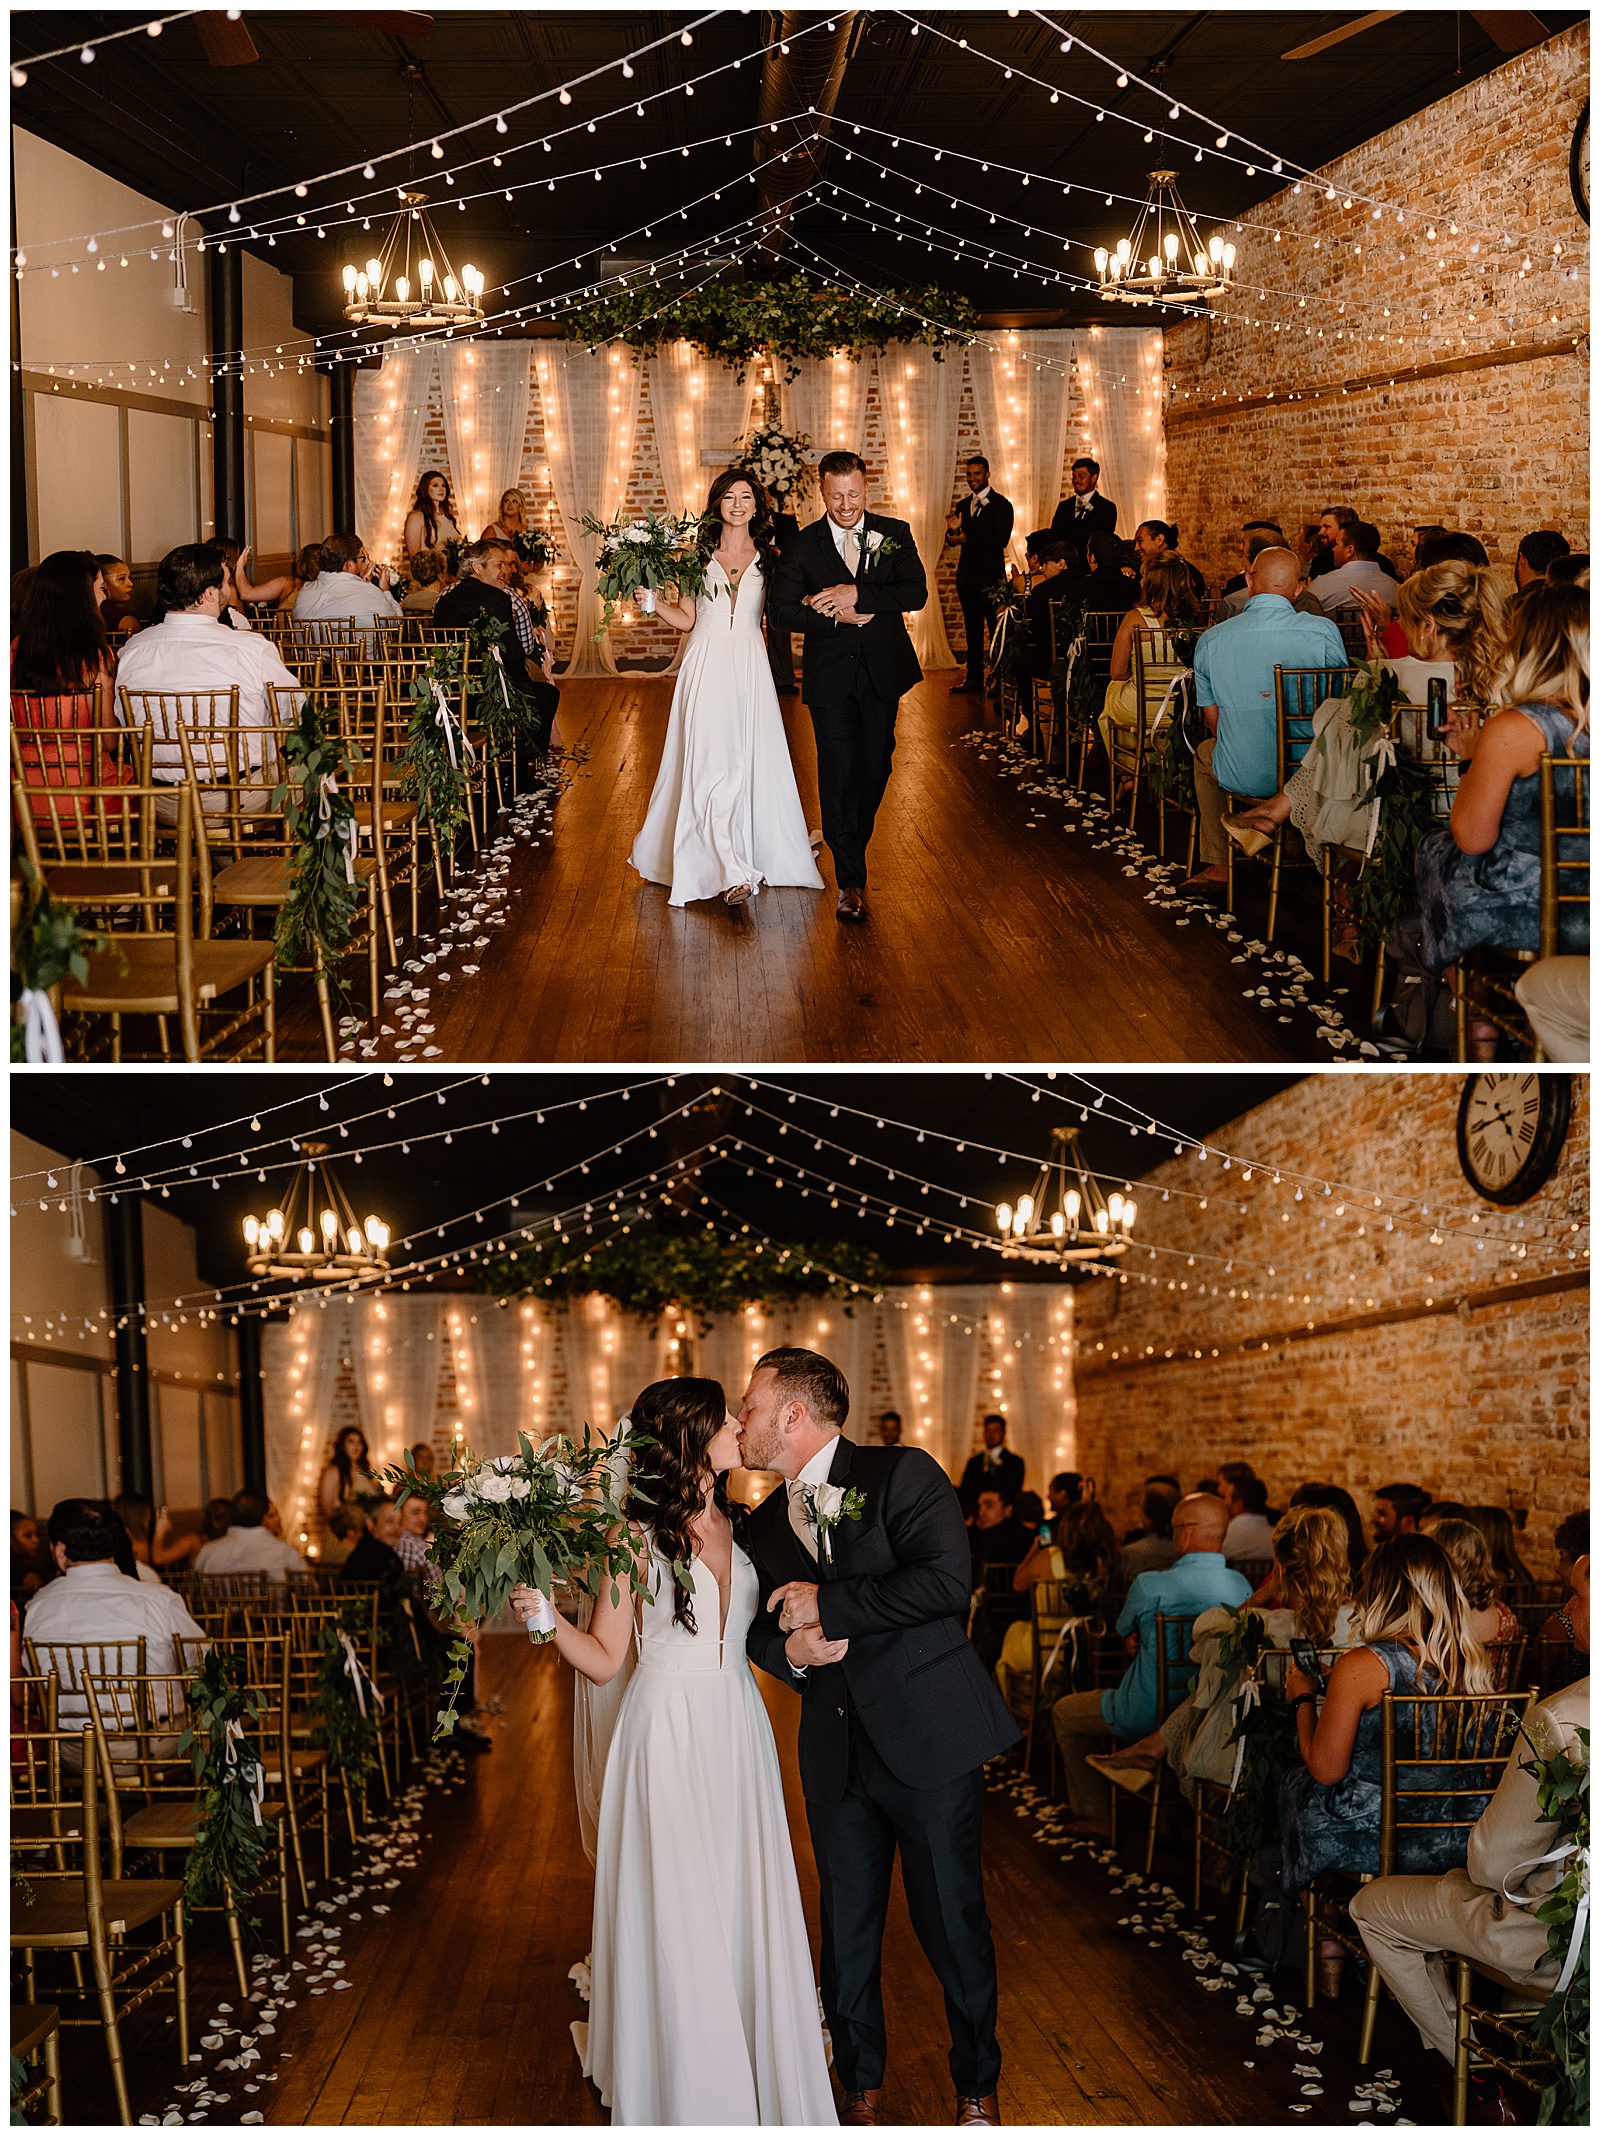 Newlywed couple leaves winston-salem wedding ceremony happy and kissing, with beautiful view of their modern rustic venue